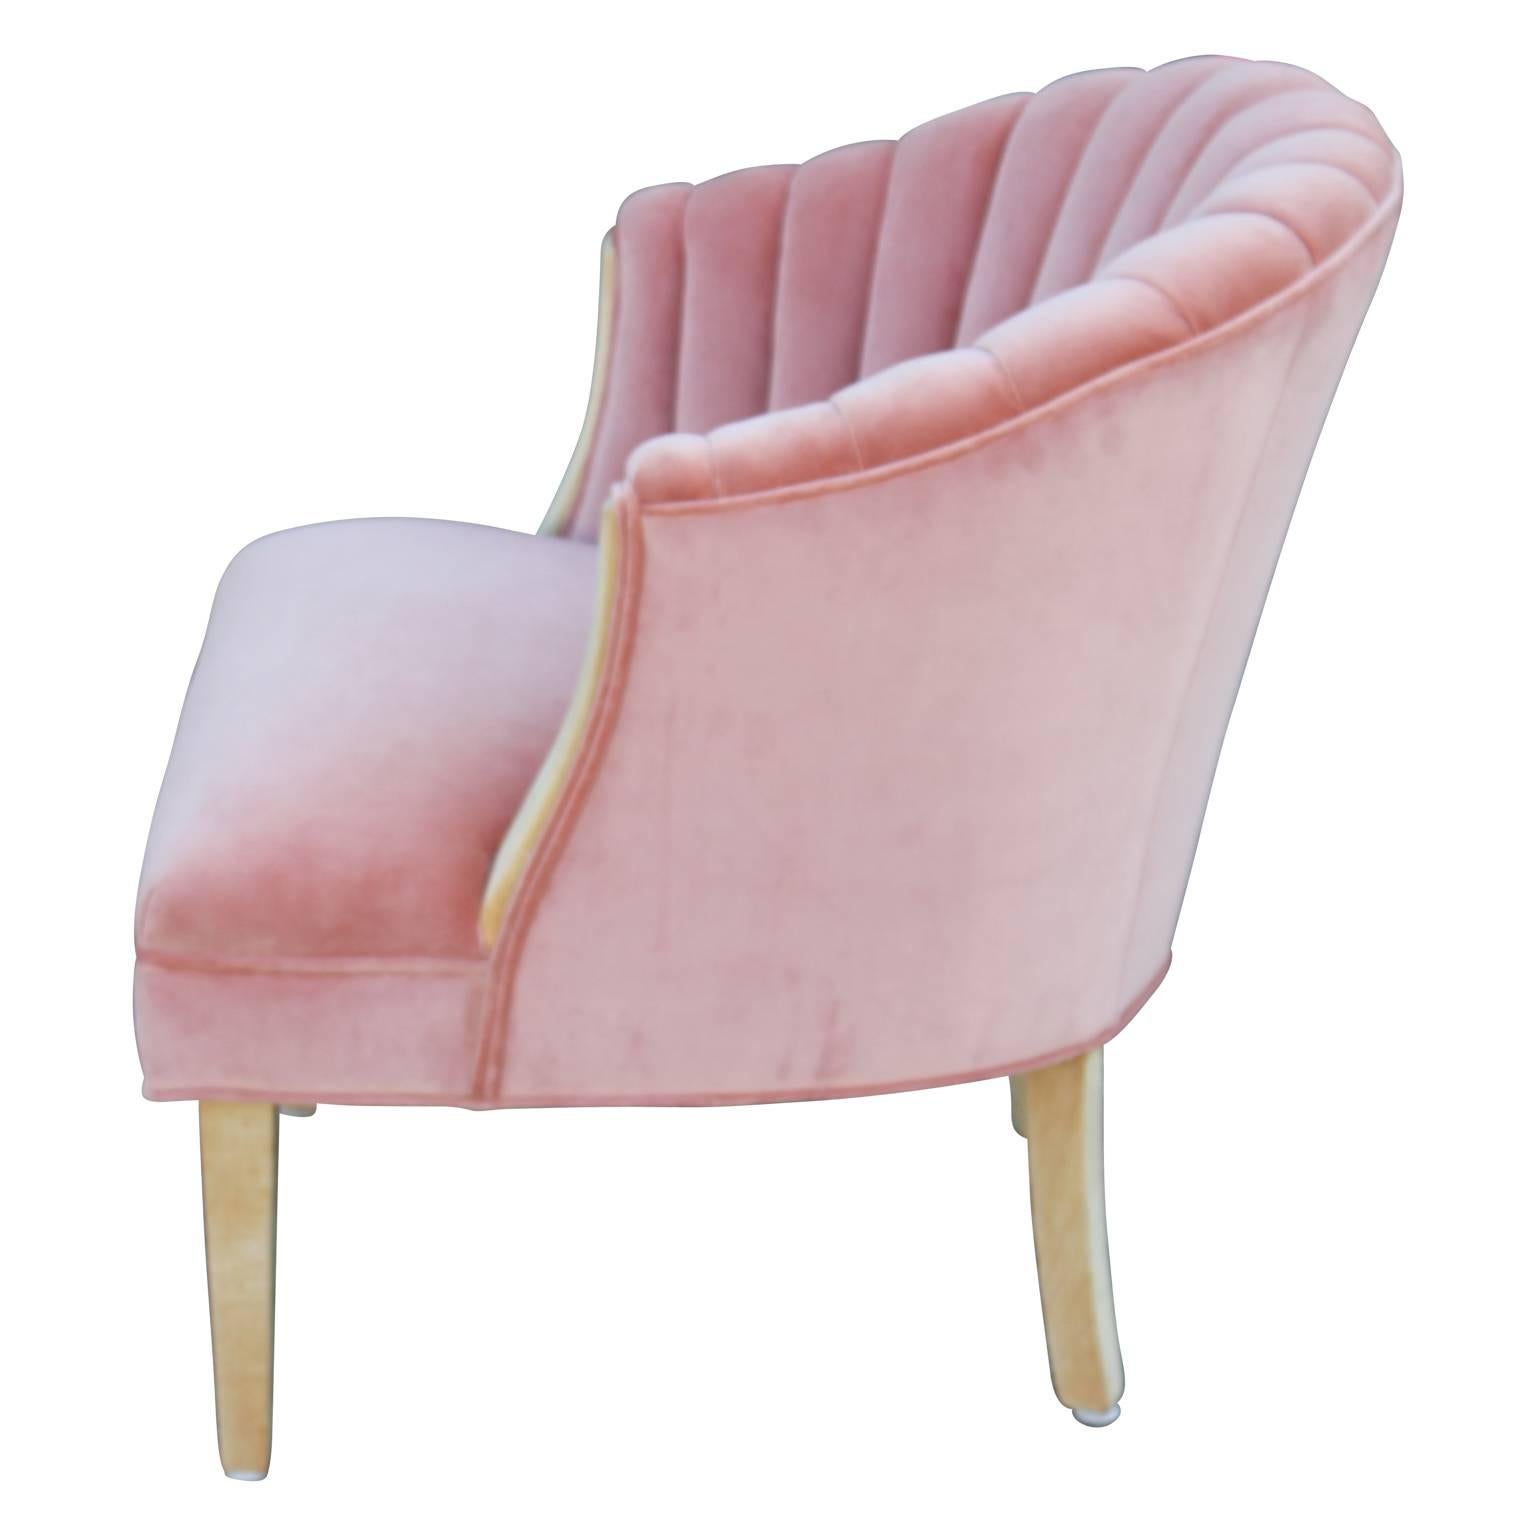 Mid-20th Century Modern Hollywood Regency Channel Back Bleached Lounge Chair in Pink Velvet